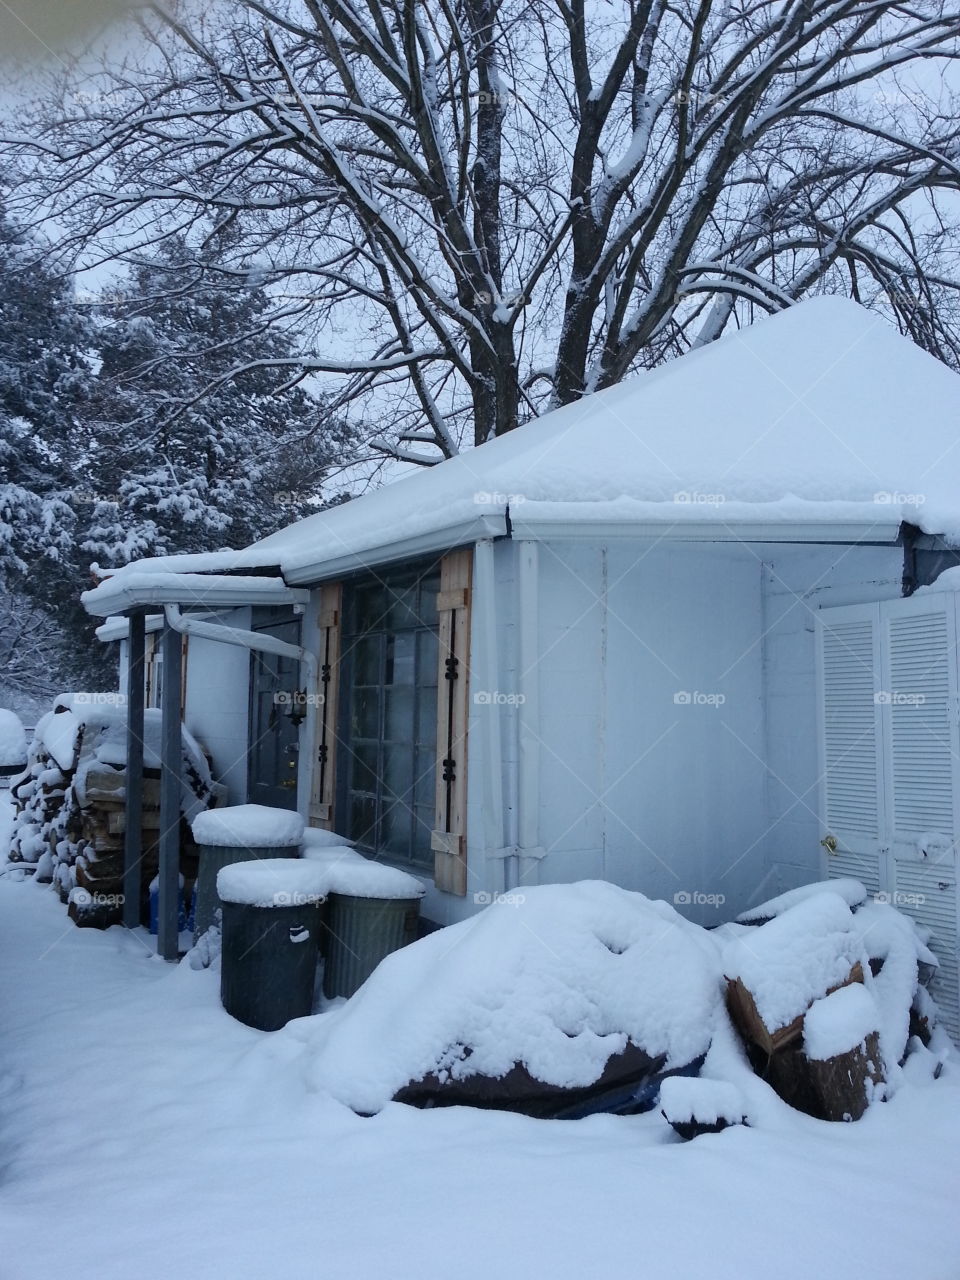 Snow covered Garage. Snow covered garage